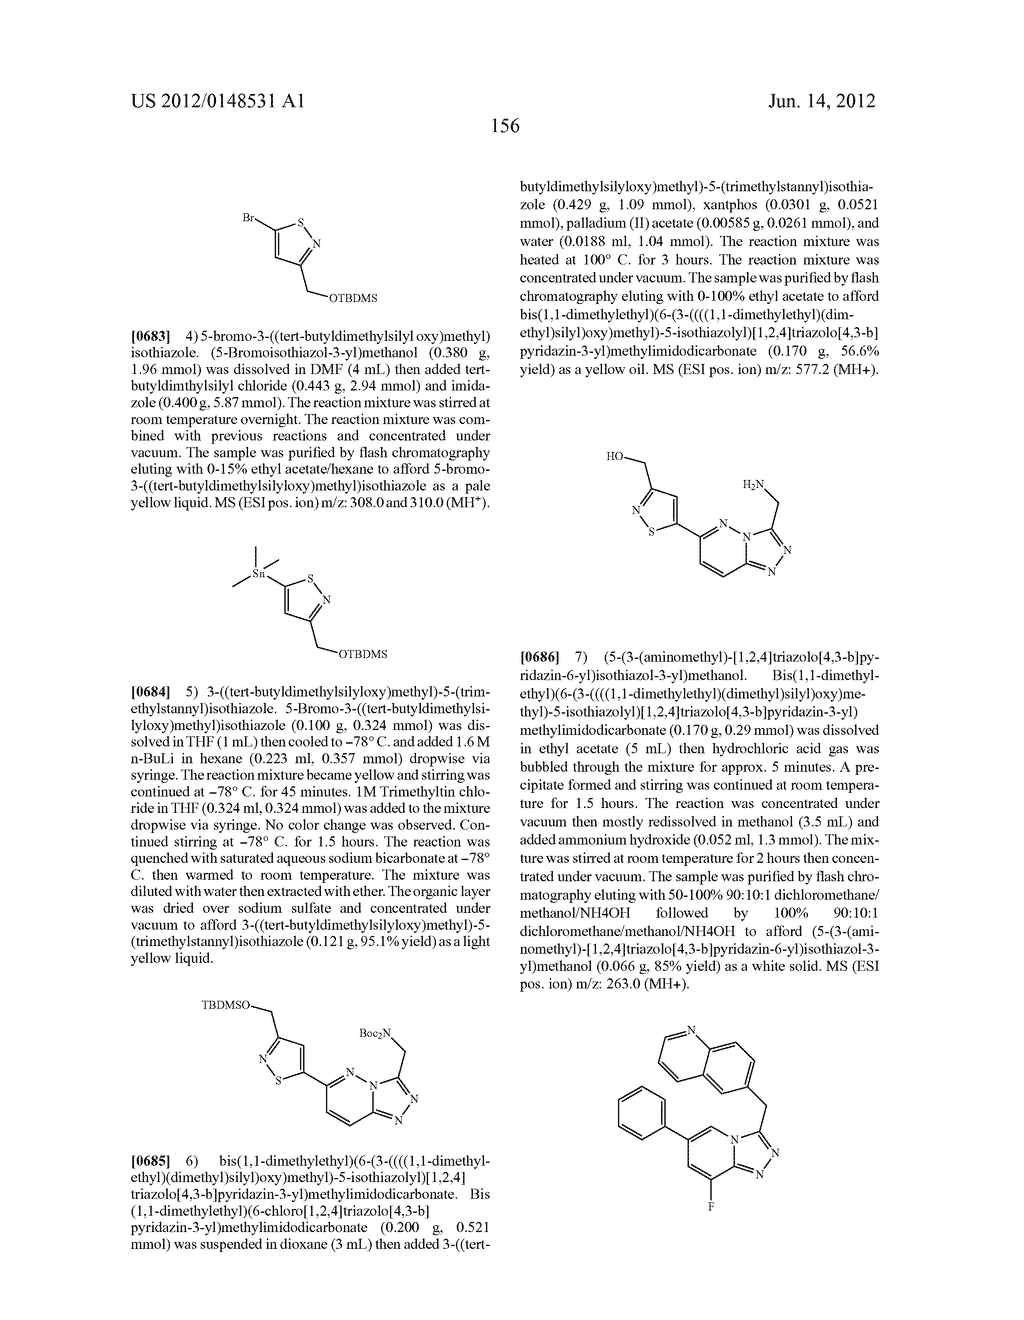 FUSED HETEROCYCLIC DERIVATIVES AND METHODS OF USE - diagram, schematic, and image 157